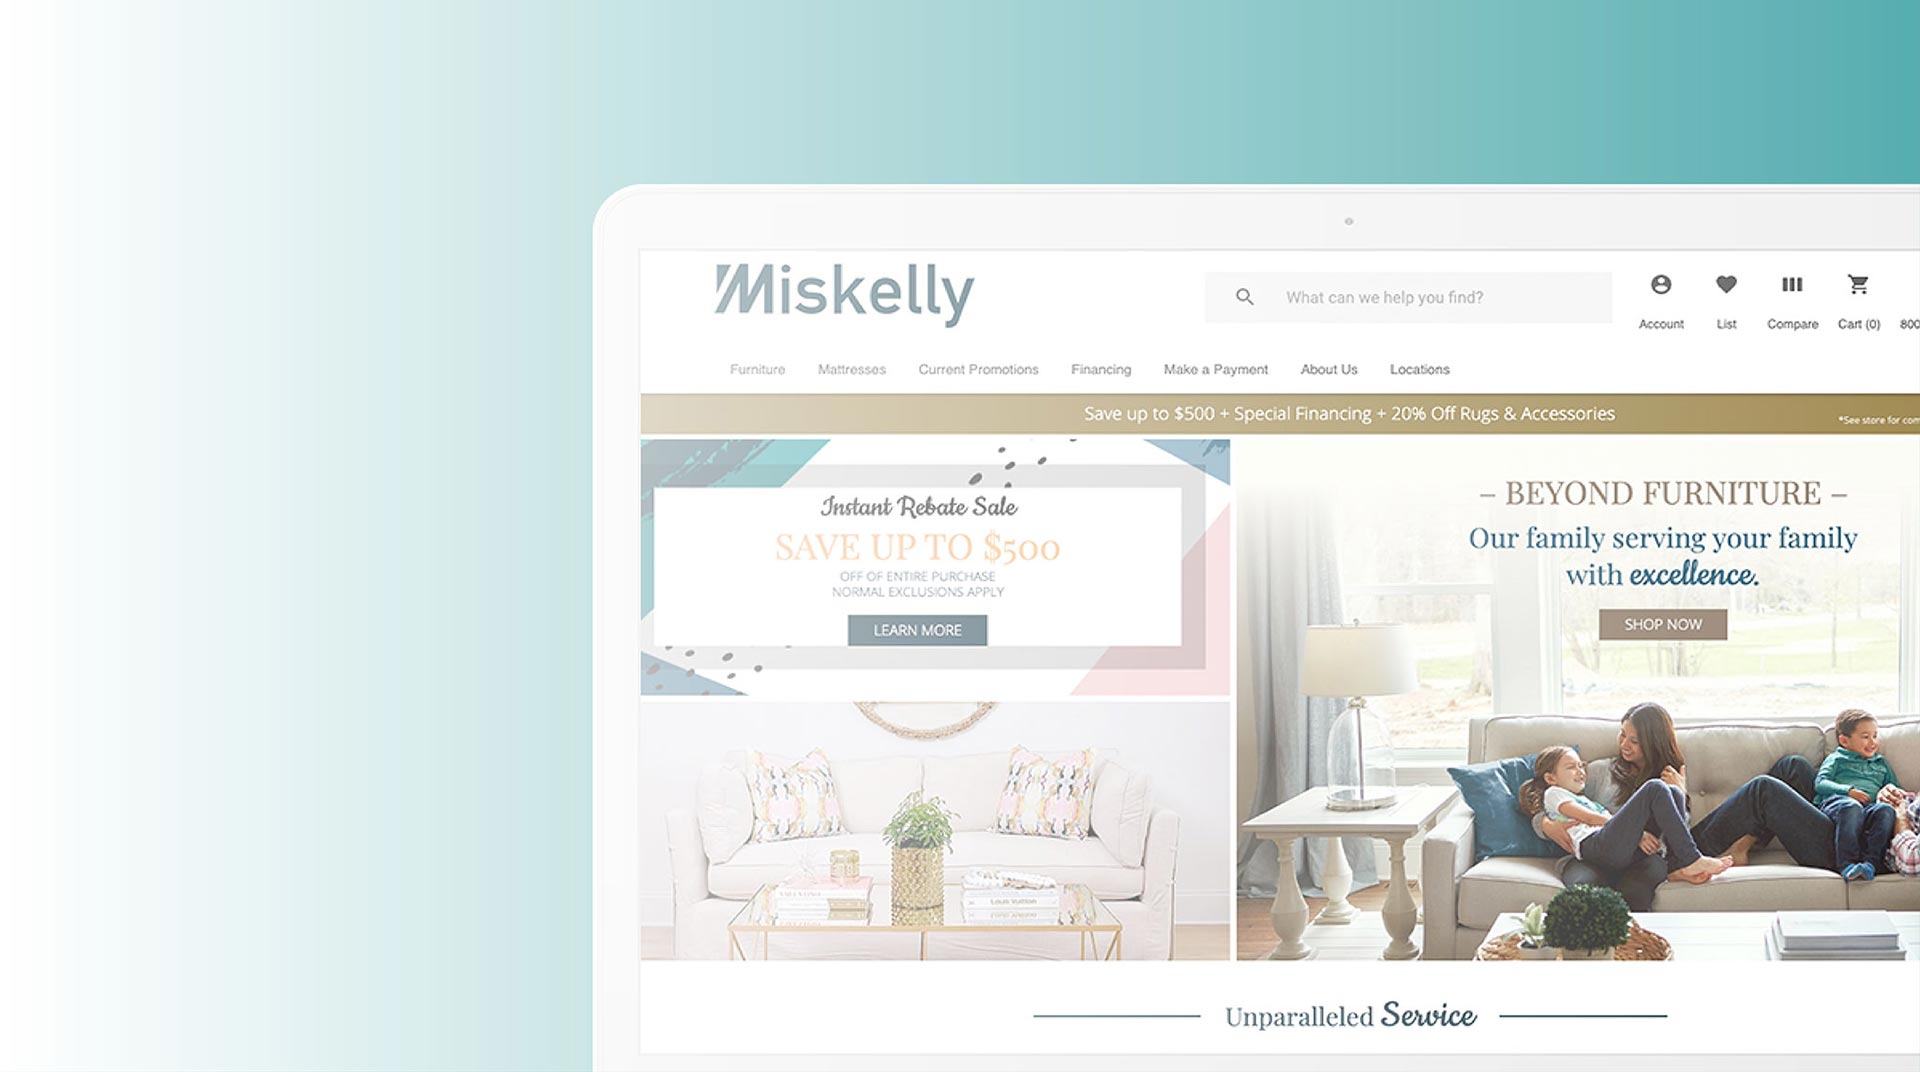 Miskelly's Furniture